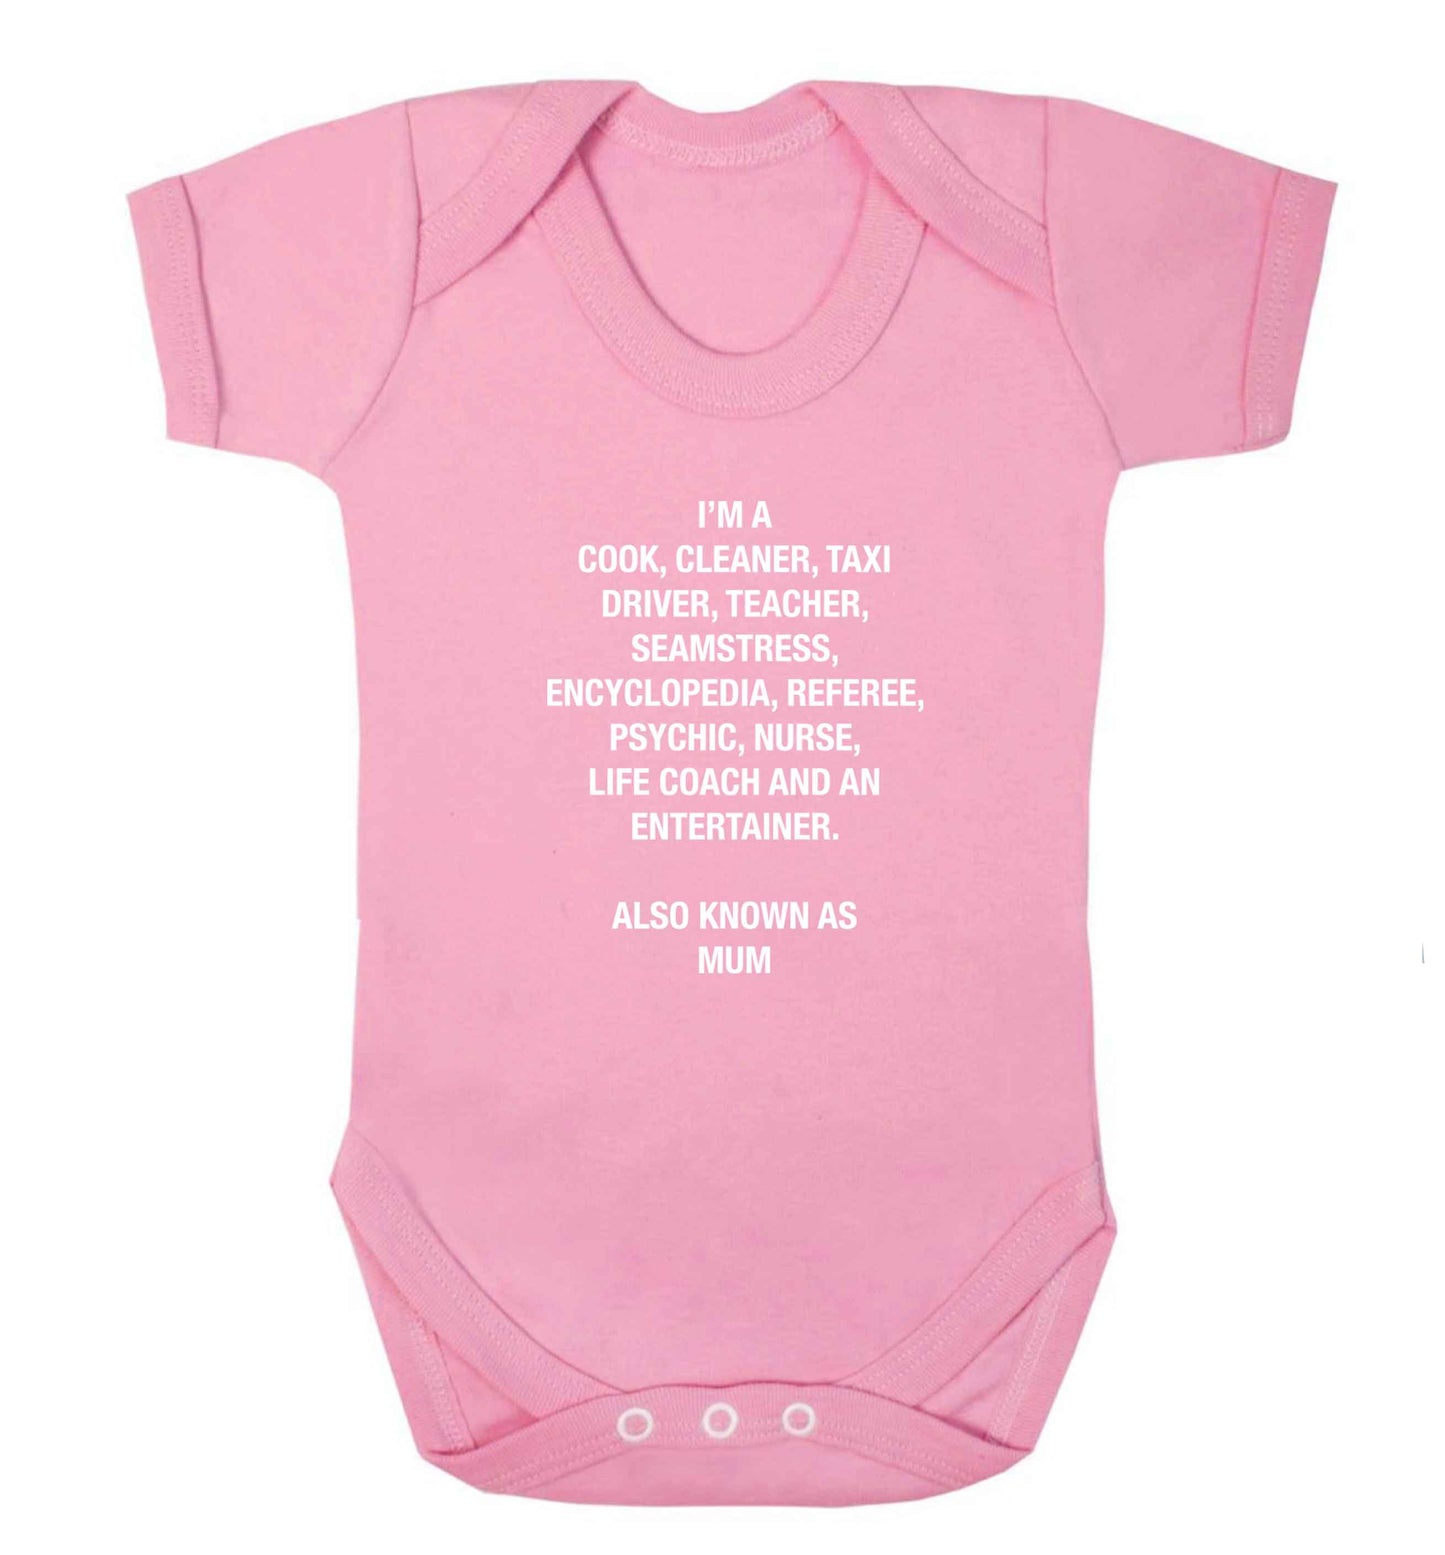 Funny gifts for your mum on mother's dayor her birthday! Mum, cook, cleaner, taxi driver, teacher, seamstress, encyclopedia, referee, psychic, nurse, life coach and entertainer baby vest pale pink 18-24 months